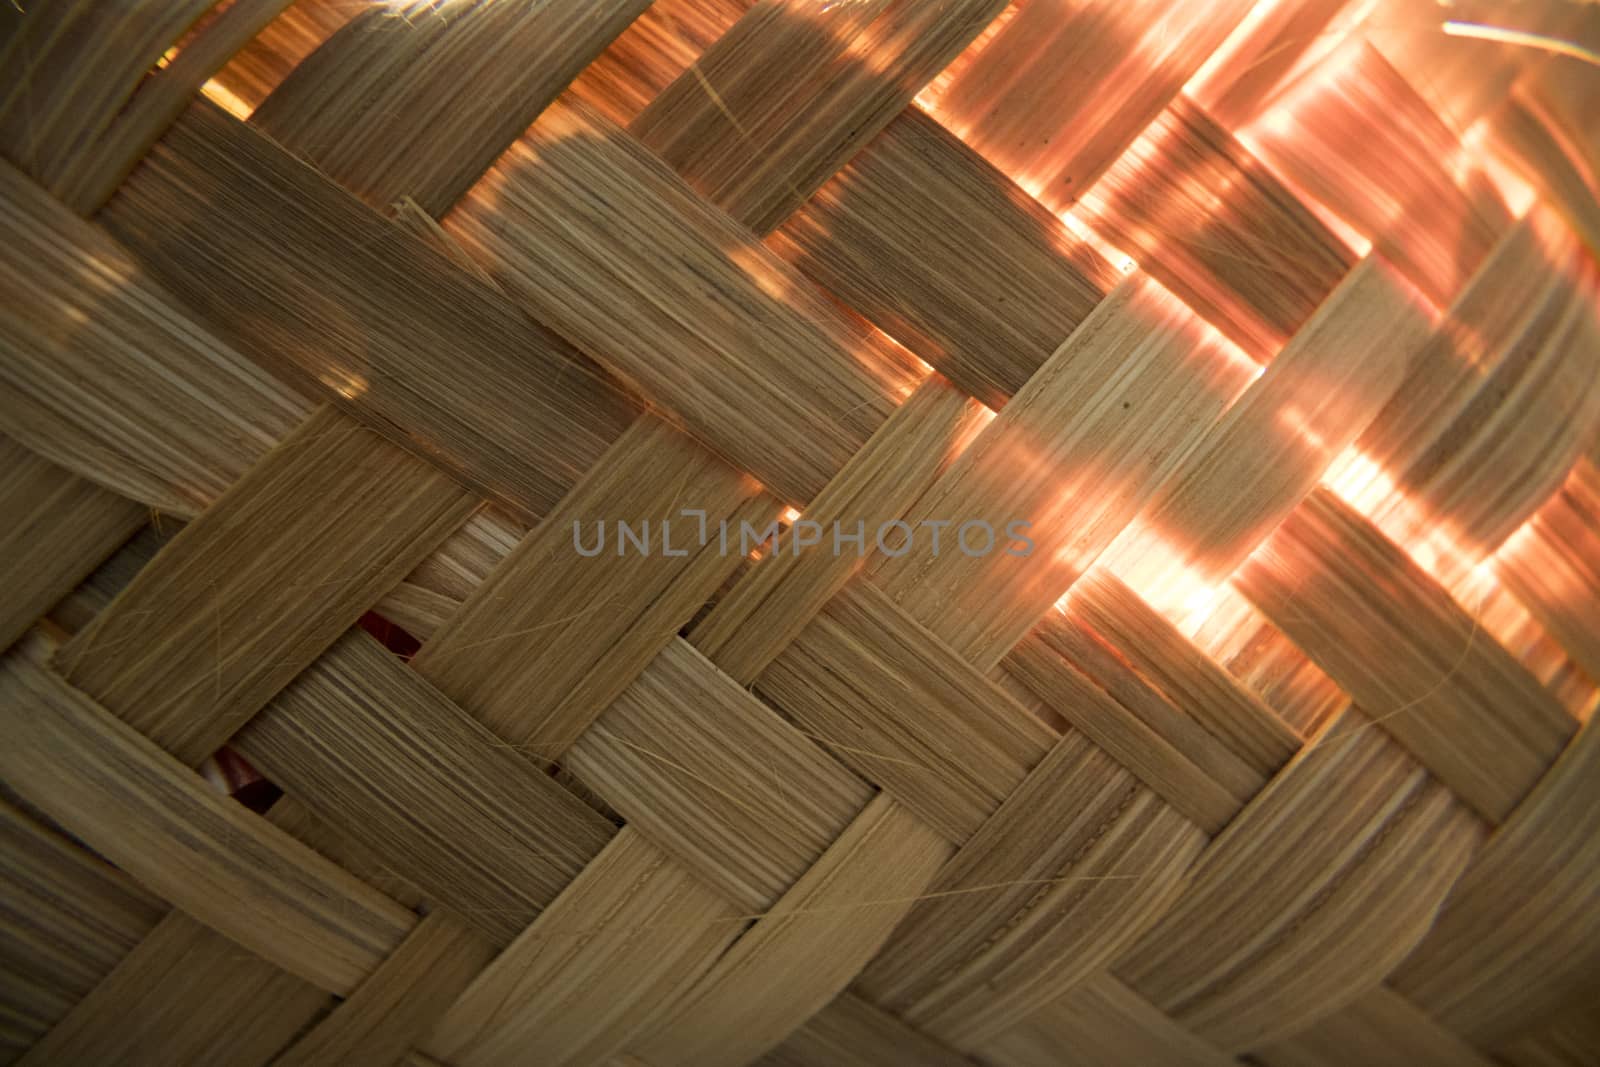 Old bamboo weave mat texture close up single focus by vector1st